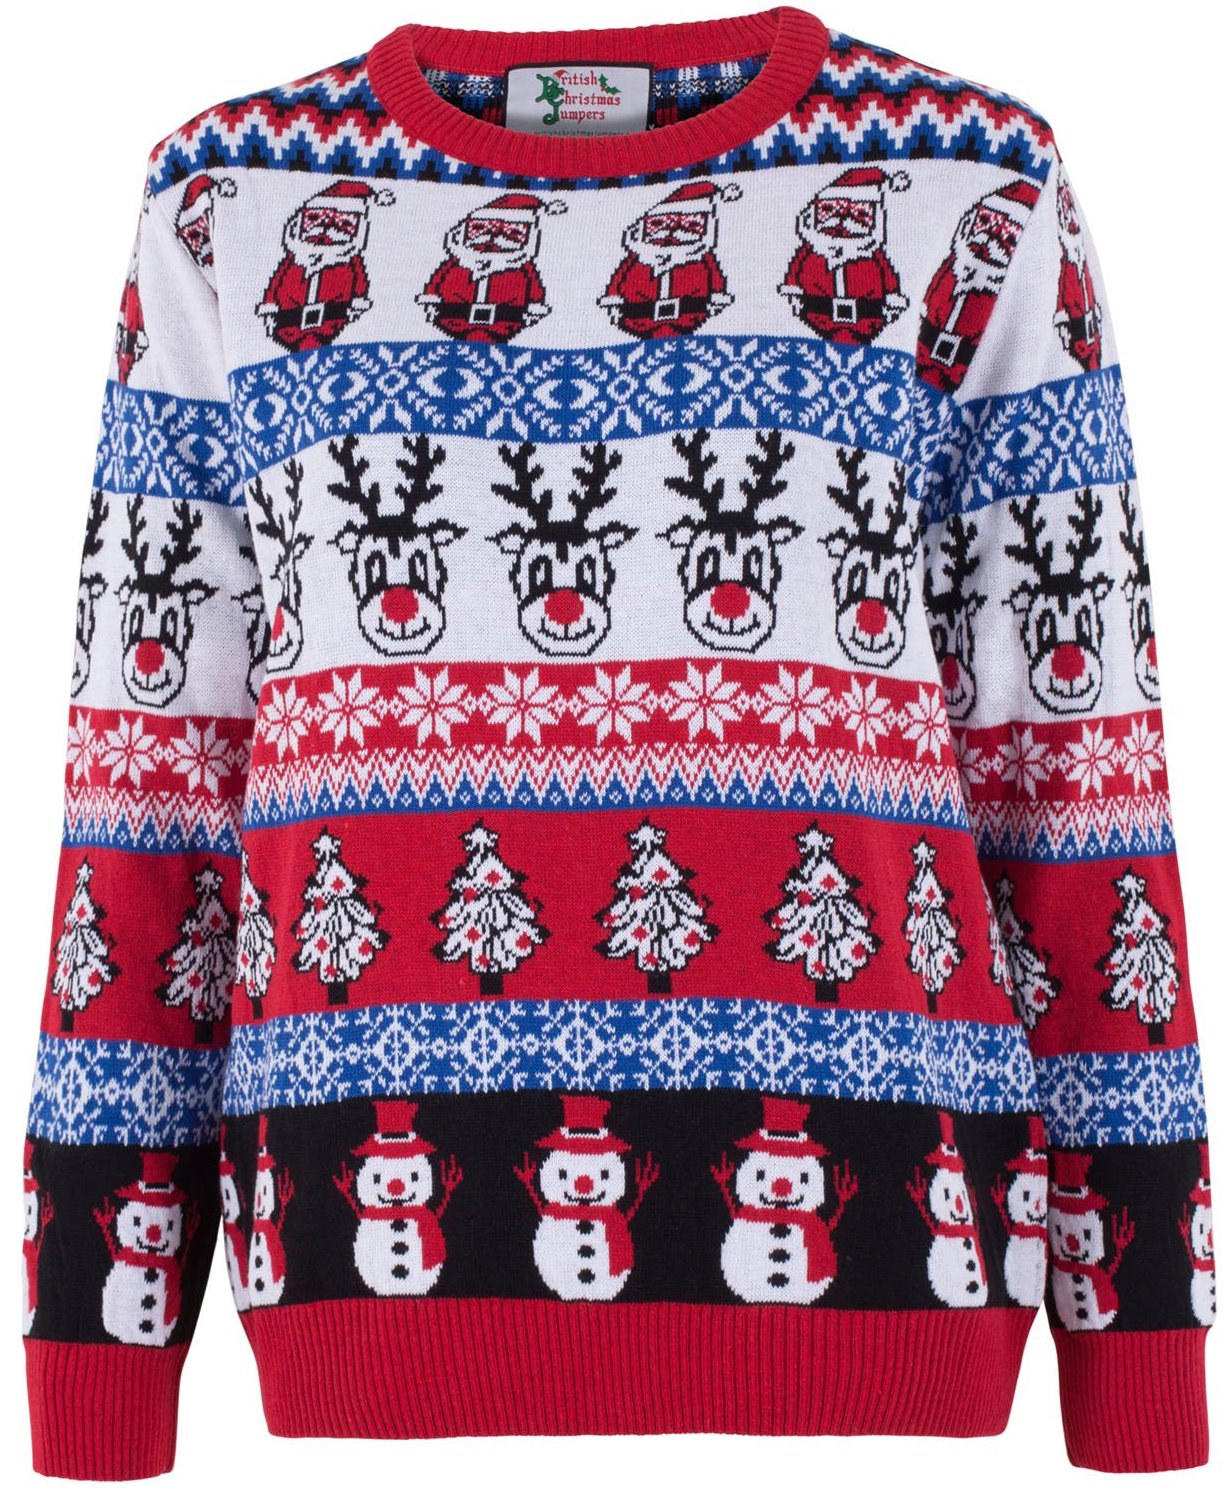 Liberal England: Poor children tend to avoid school on Christmas Jumper Day